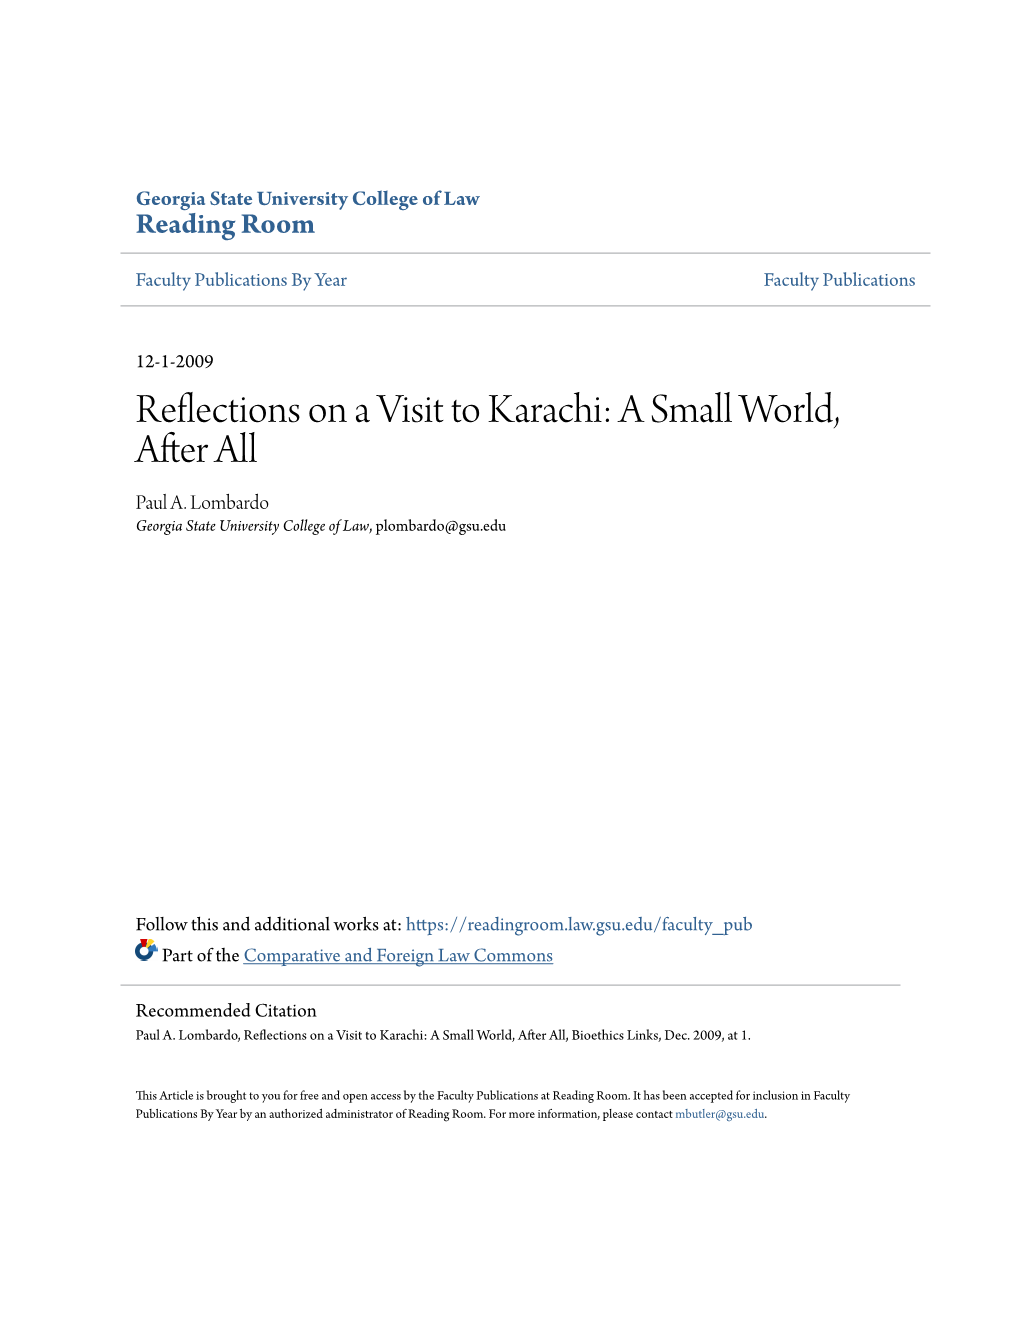 Reflections on a Visit to Karachi: a Small World, After All Paul A